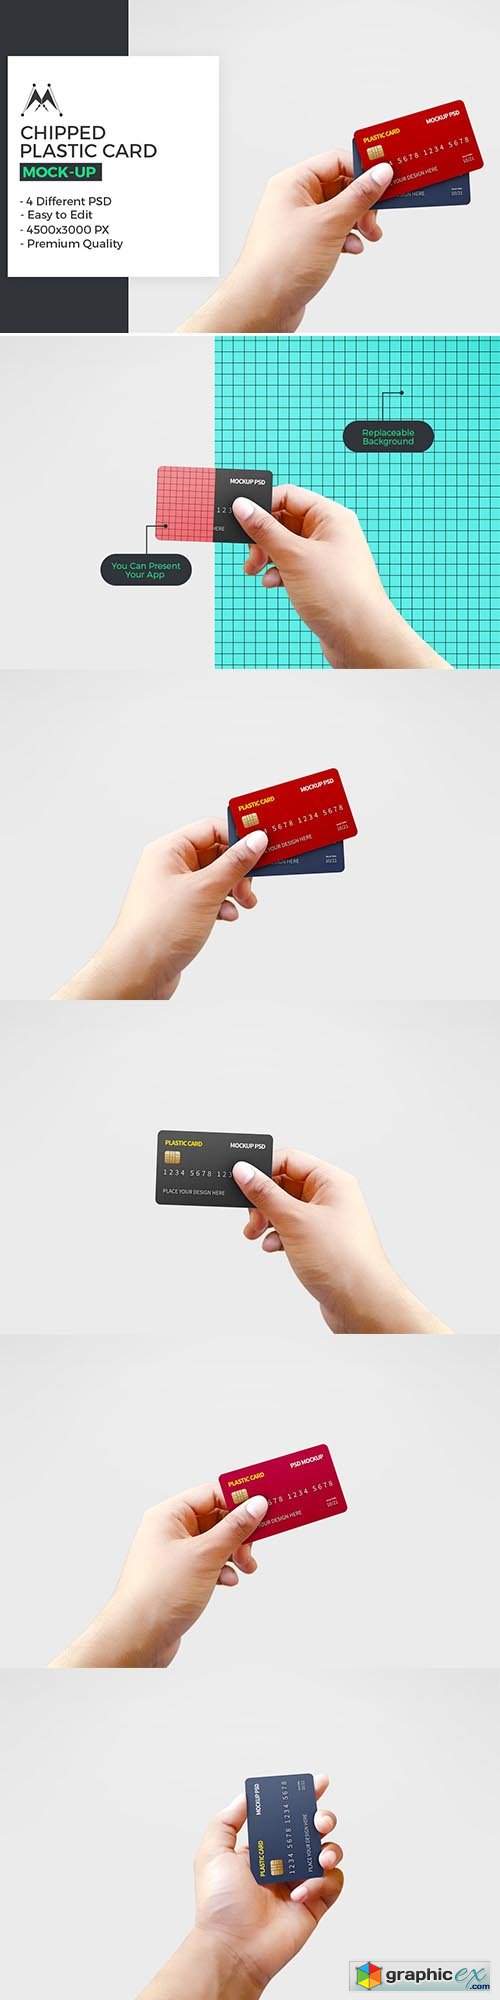 Chipped Plastic Card in Hand Mockup 